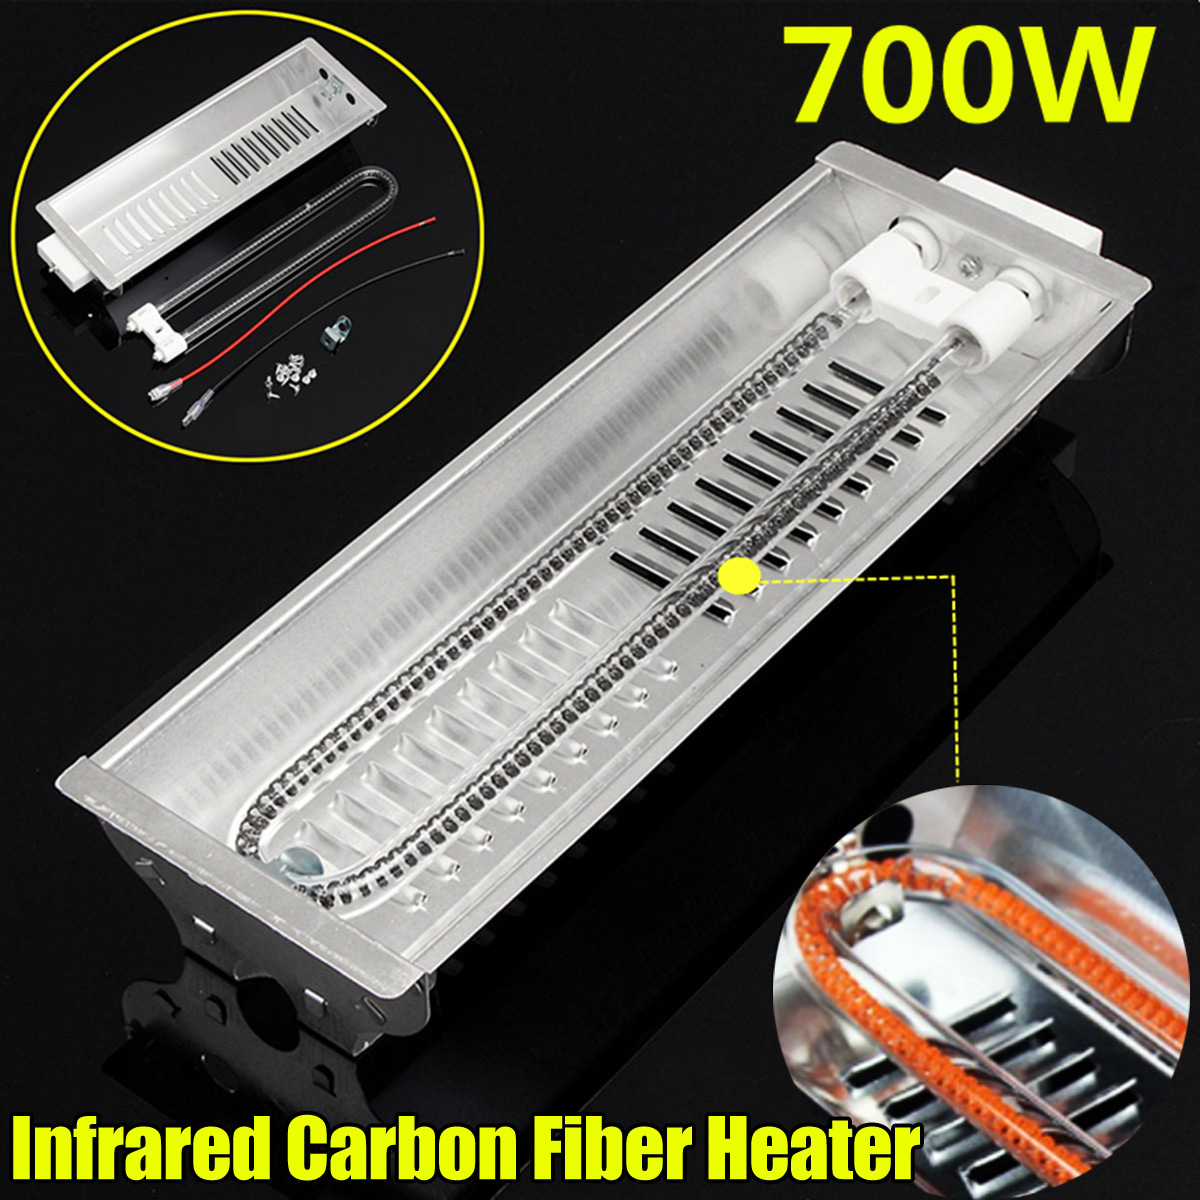 700W-Double-Far-Infrared-Paint-Curing-Heating-Lamp-Carbon-Fiber-Heater-1392755-1